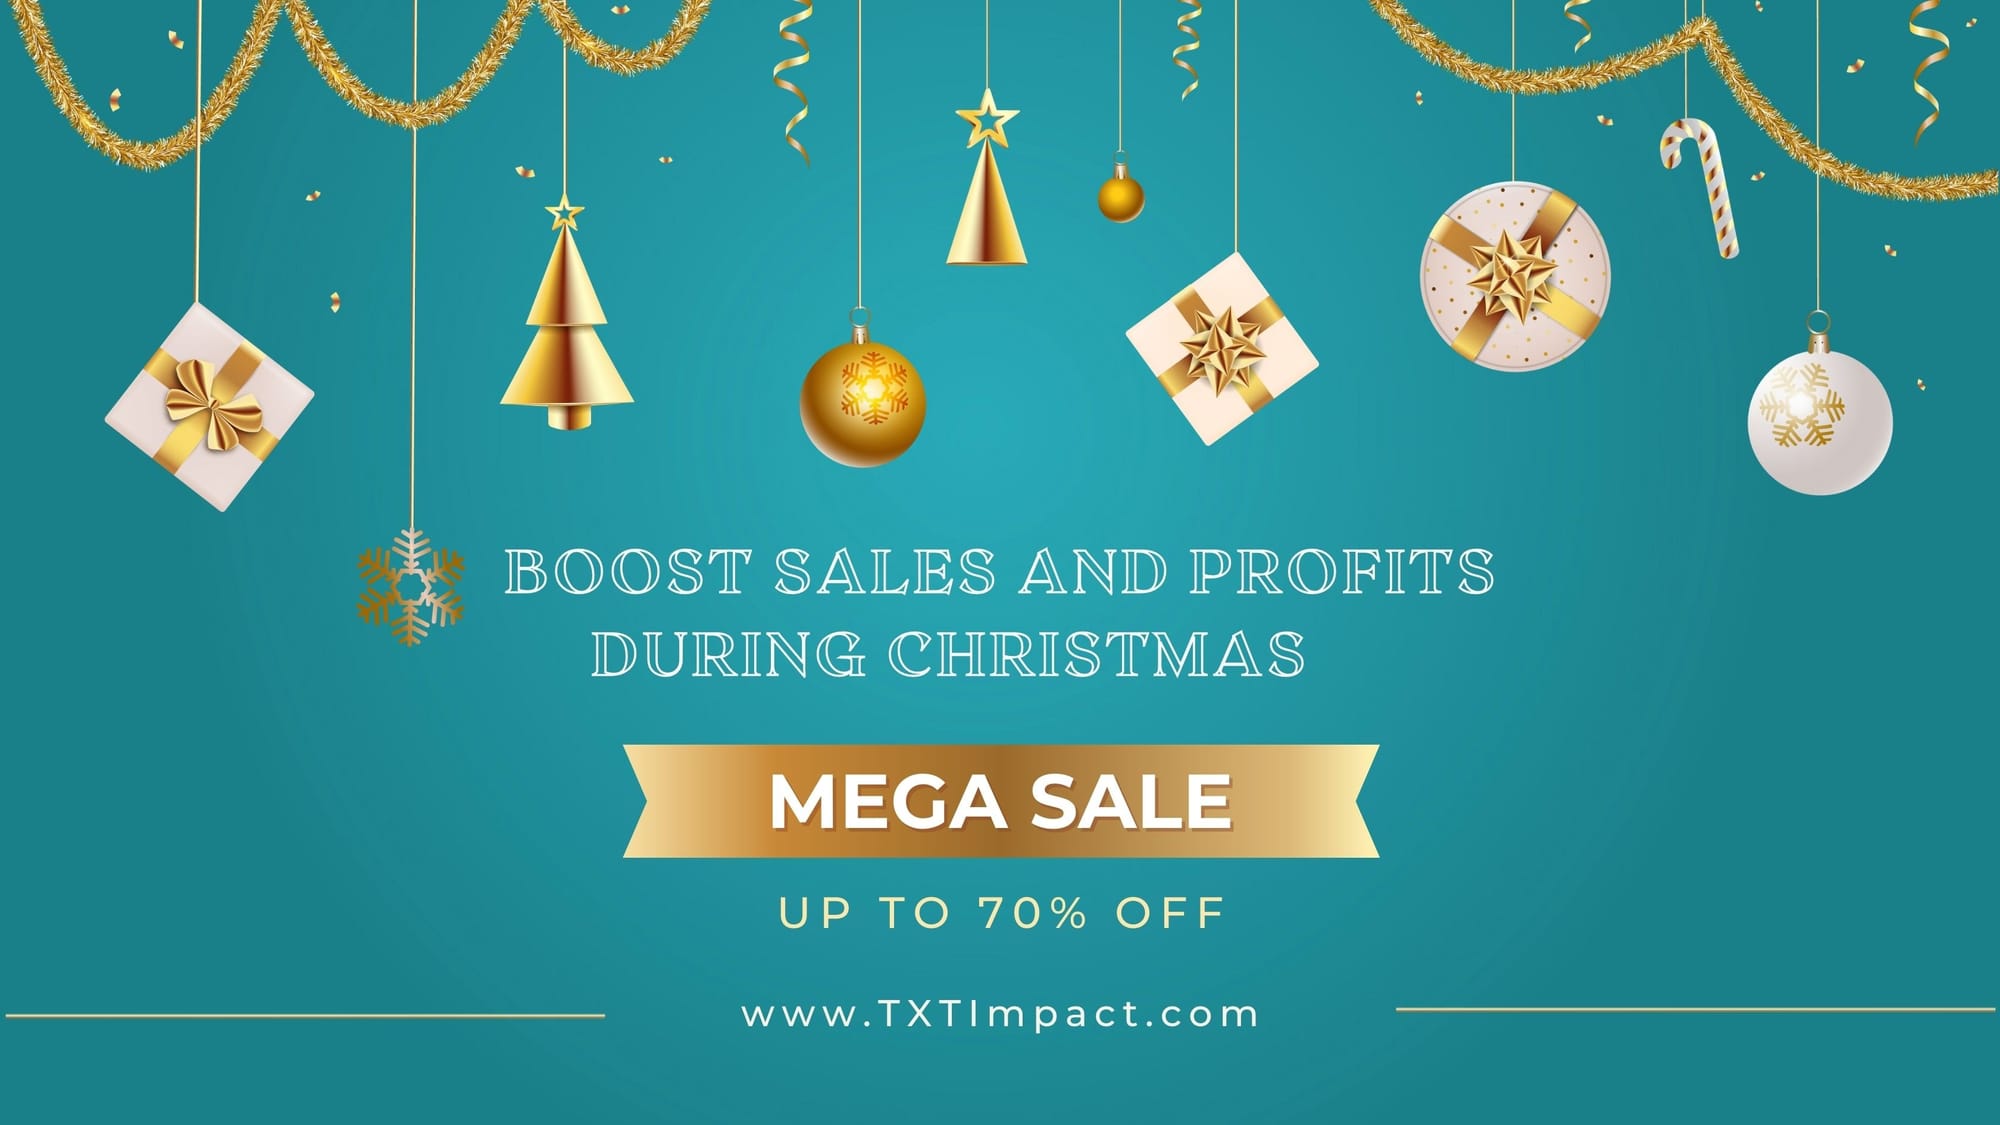 Boost Sales and Profits During Christmas.jpg